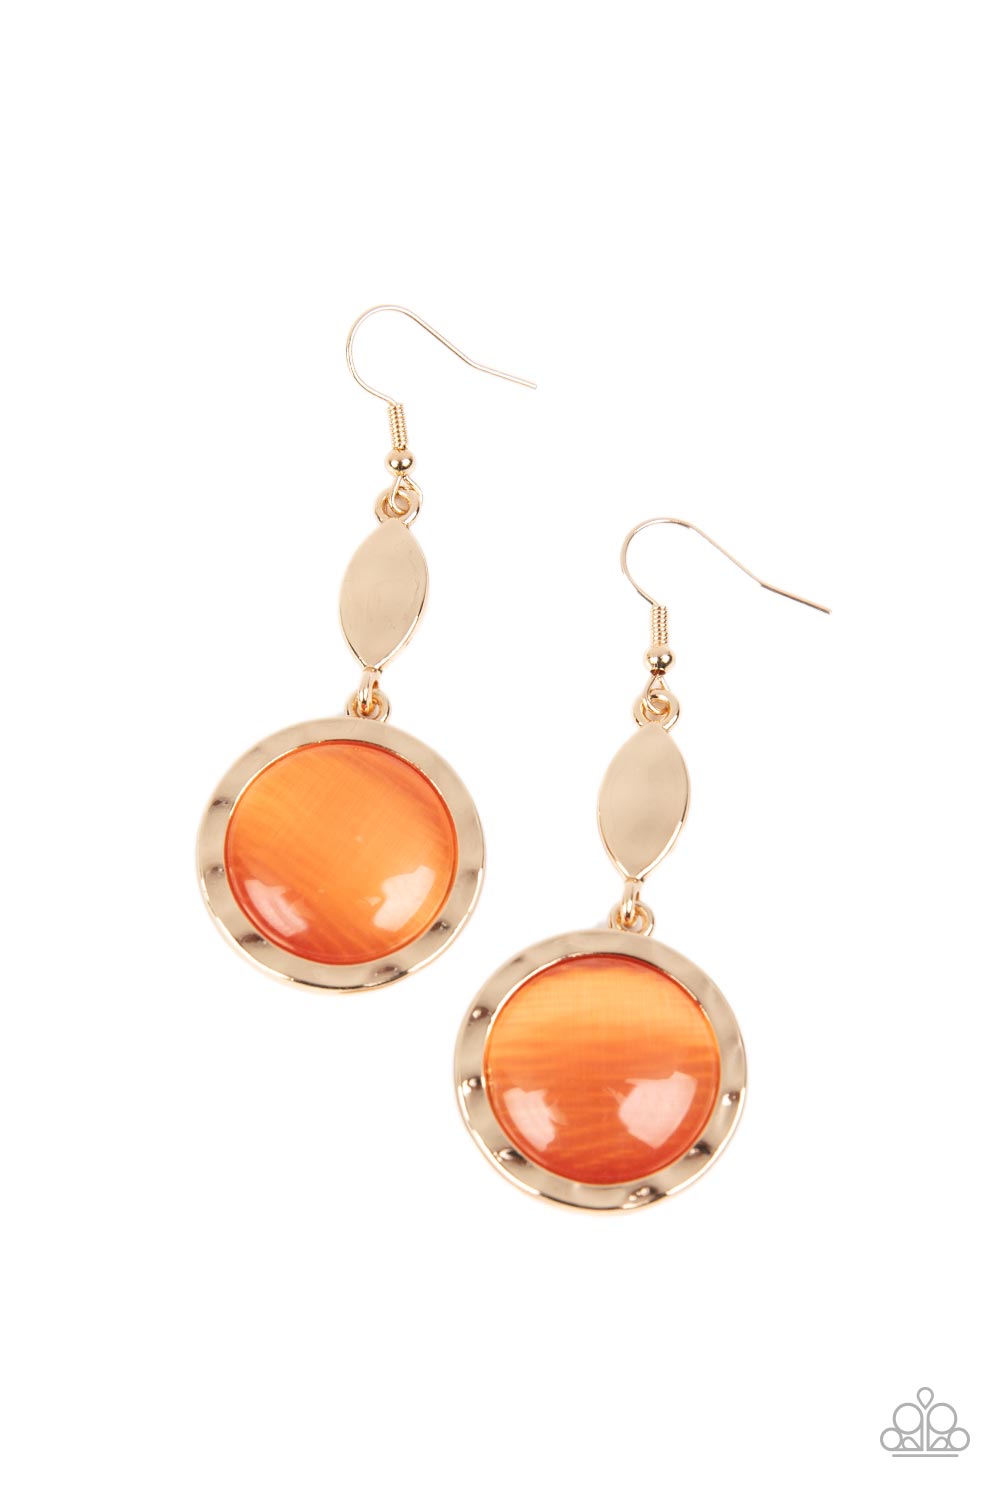 Magically Magnificent - Orange Earrings - Paparazzi Accessories